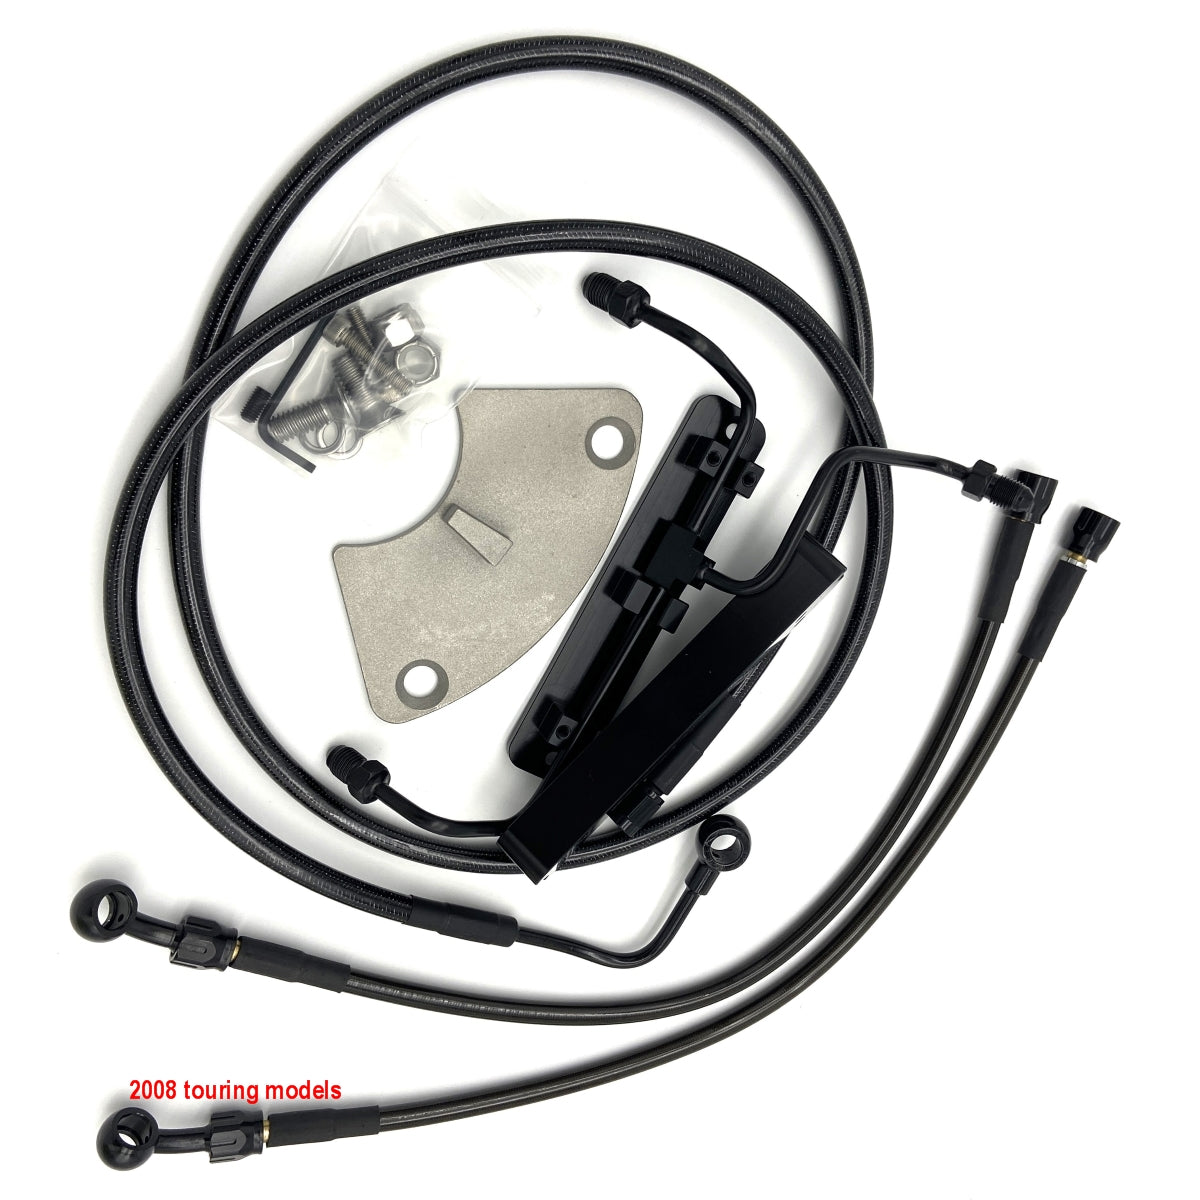 ABS variable Brake Line Kit Harley touring with increased ride height